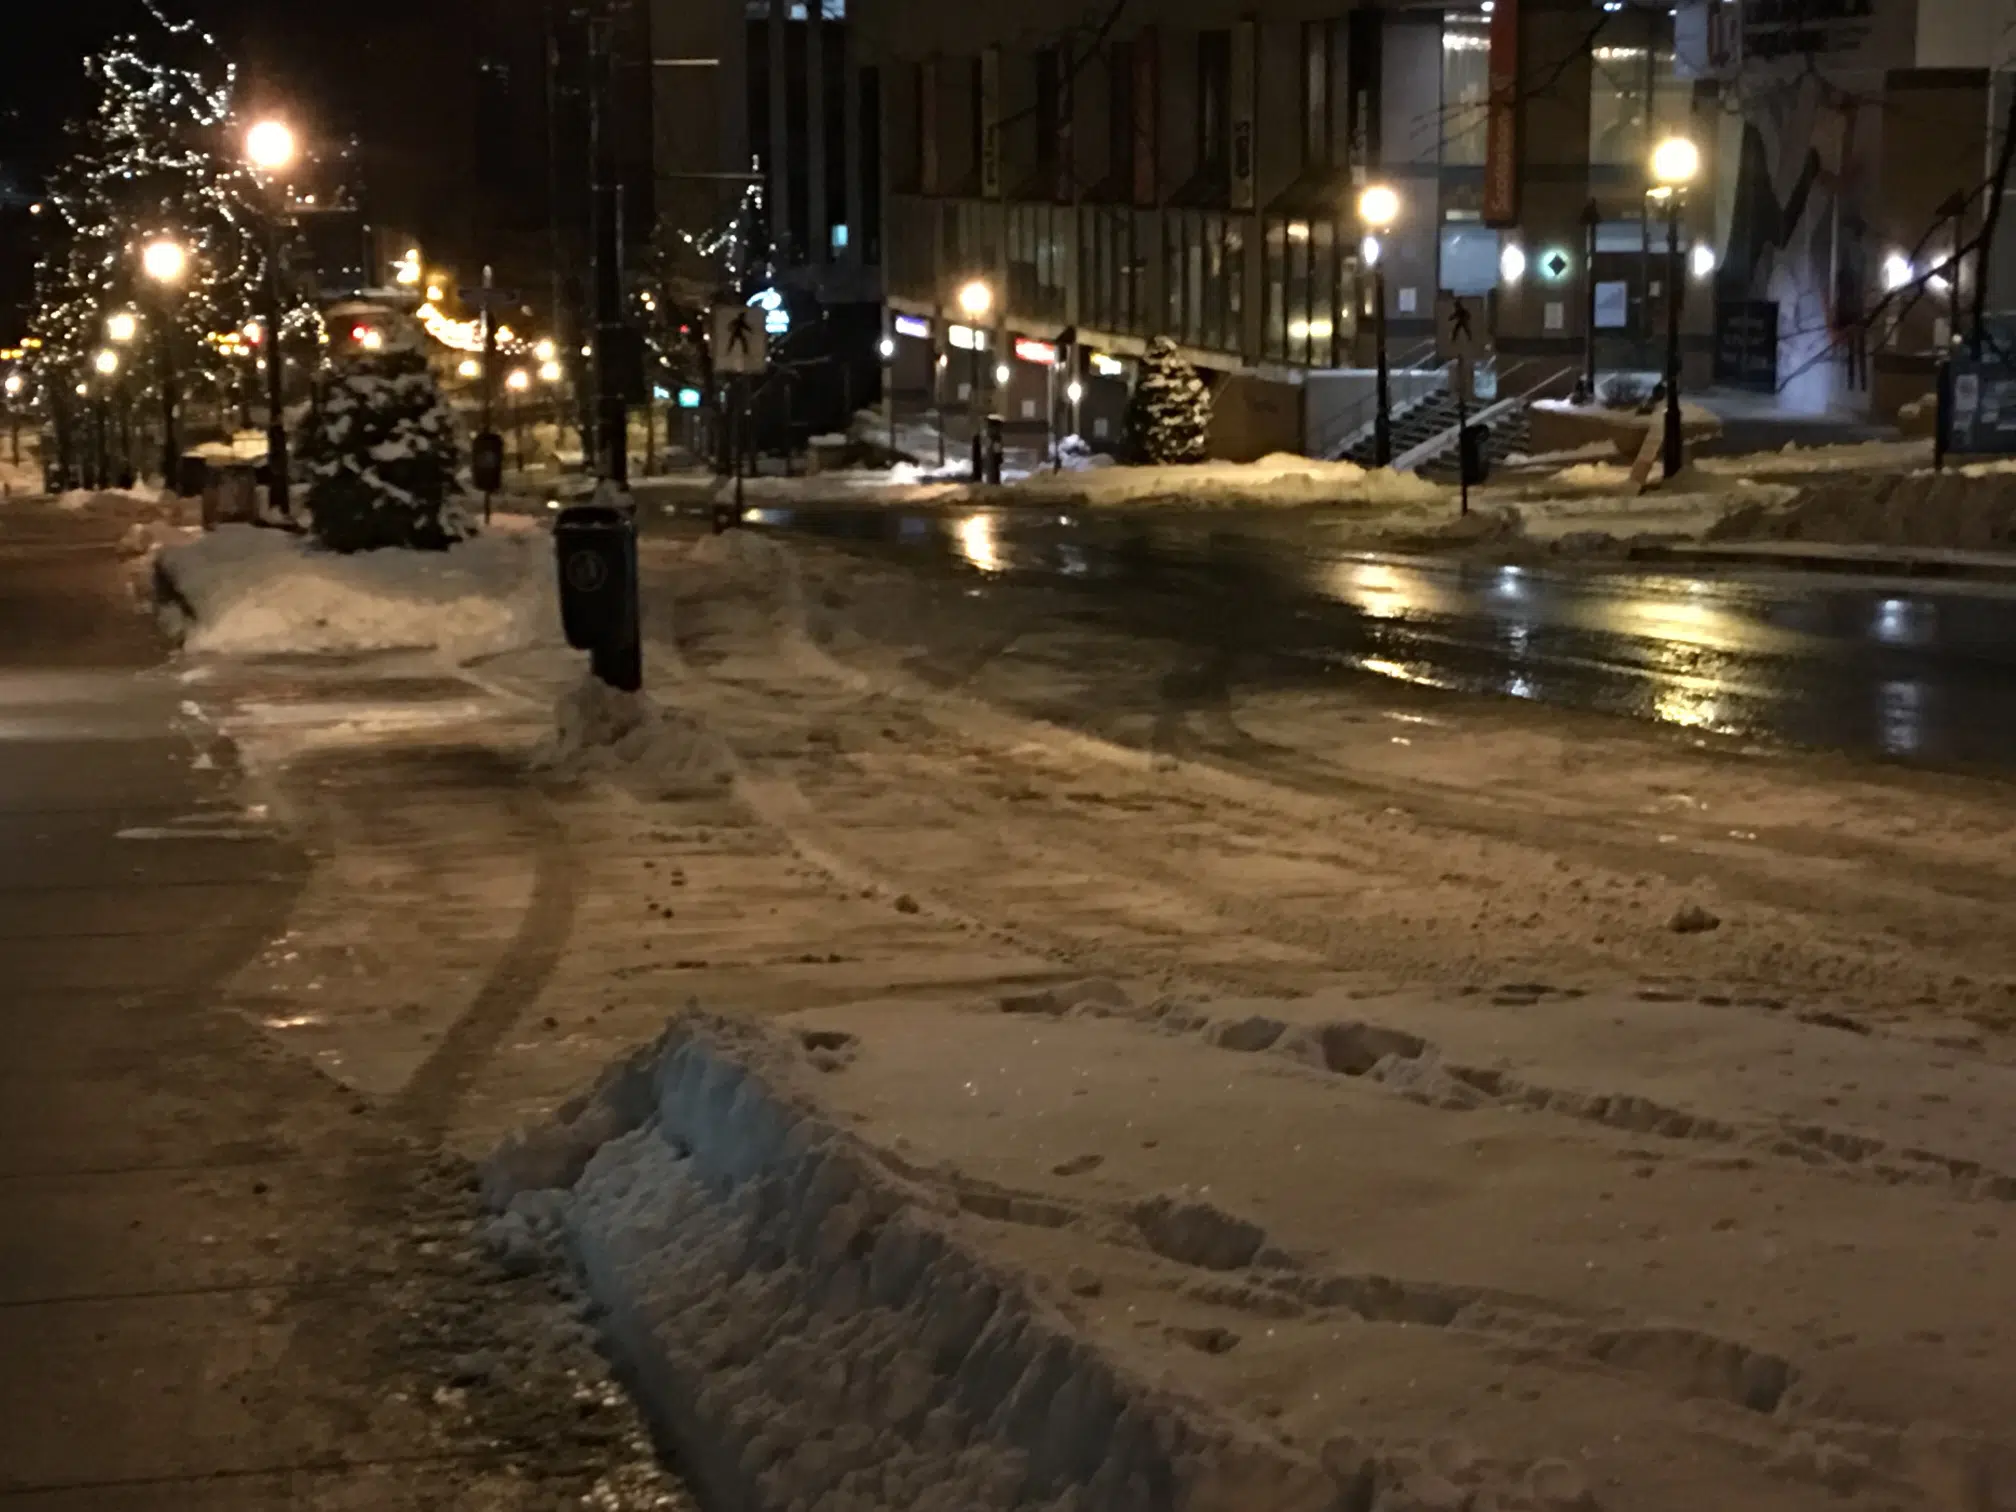 UPDATED: City Issues 111 Tickets During Overnight Parking Ban